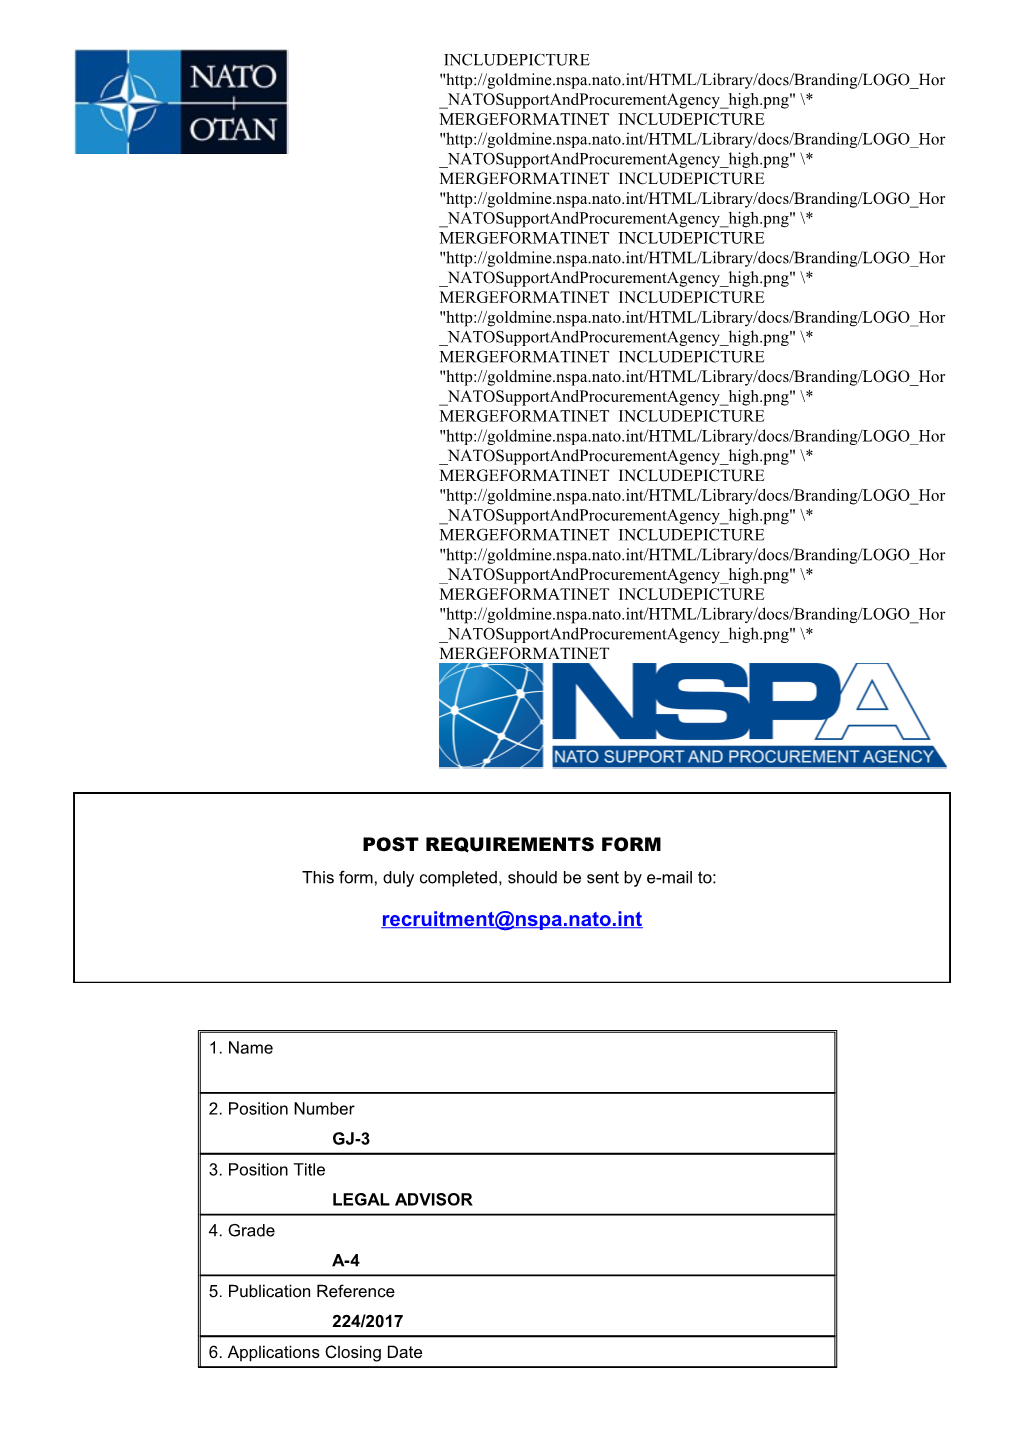 Post Requirements Form